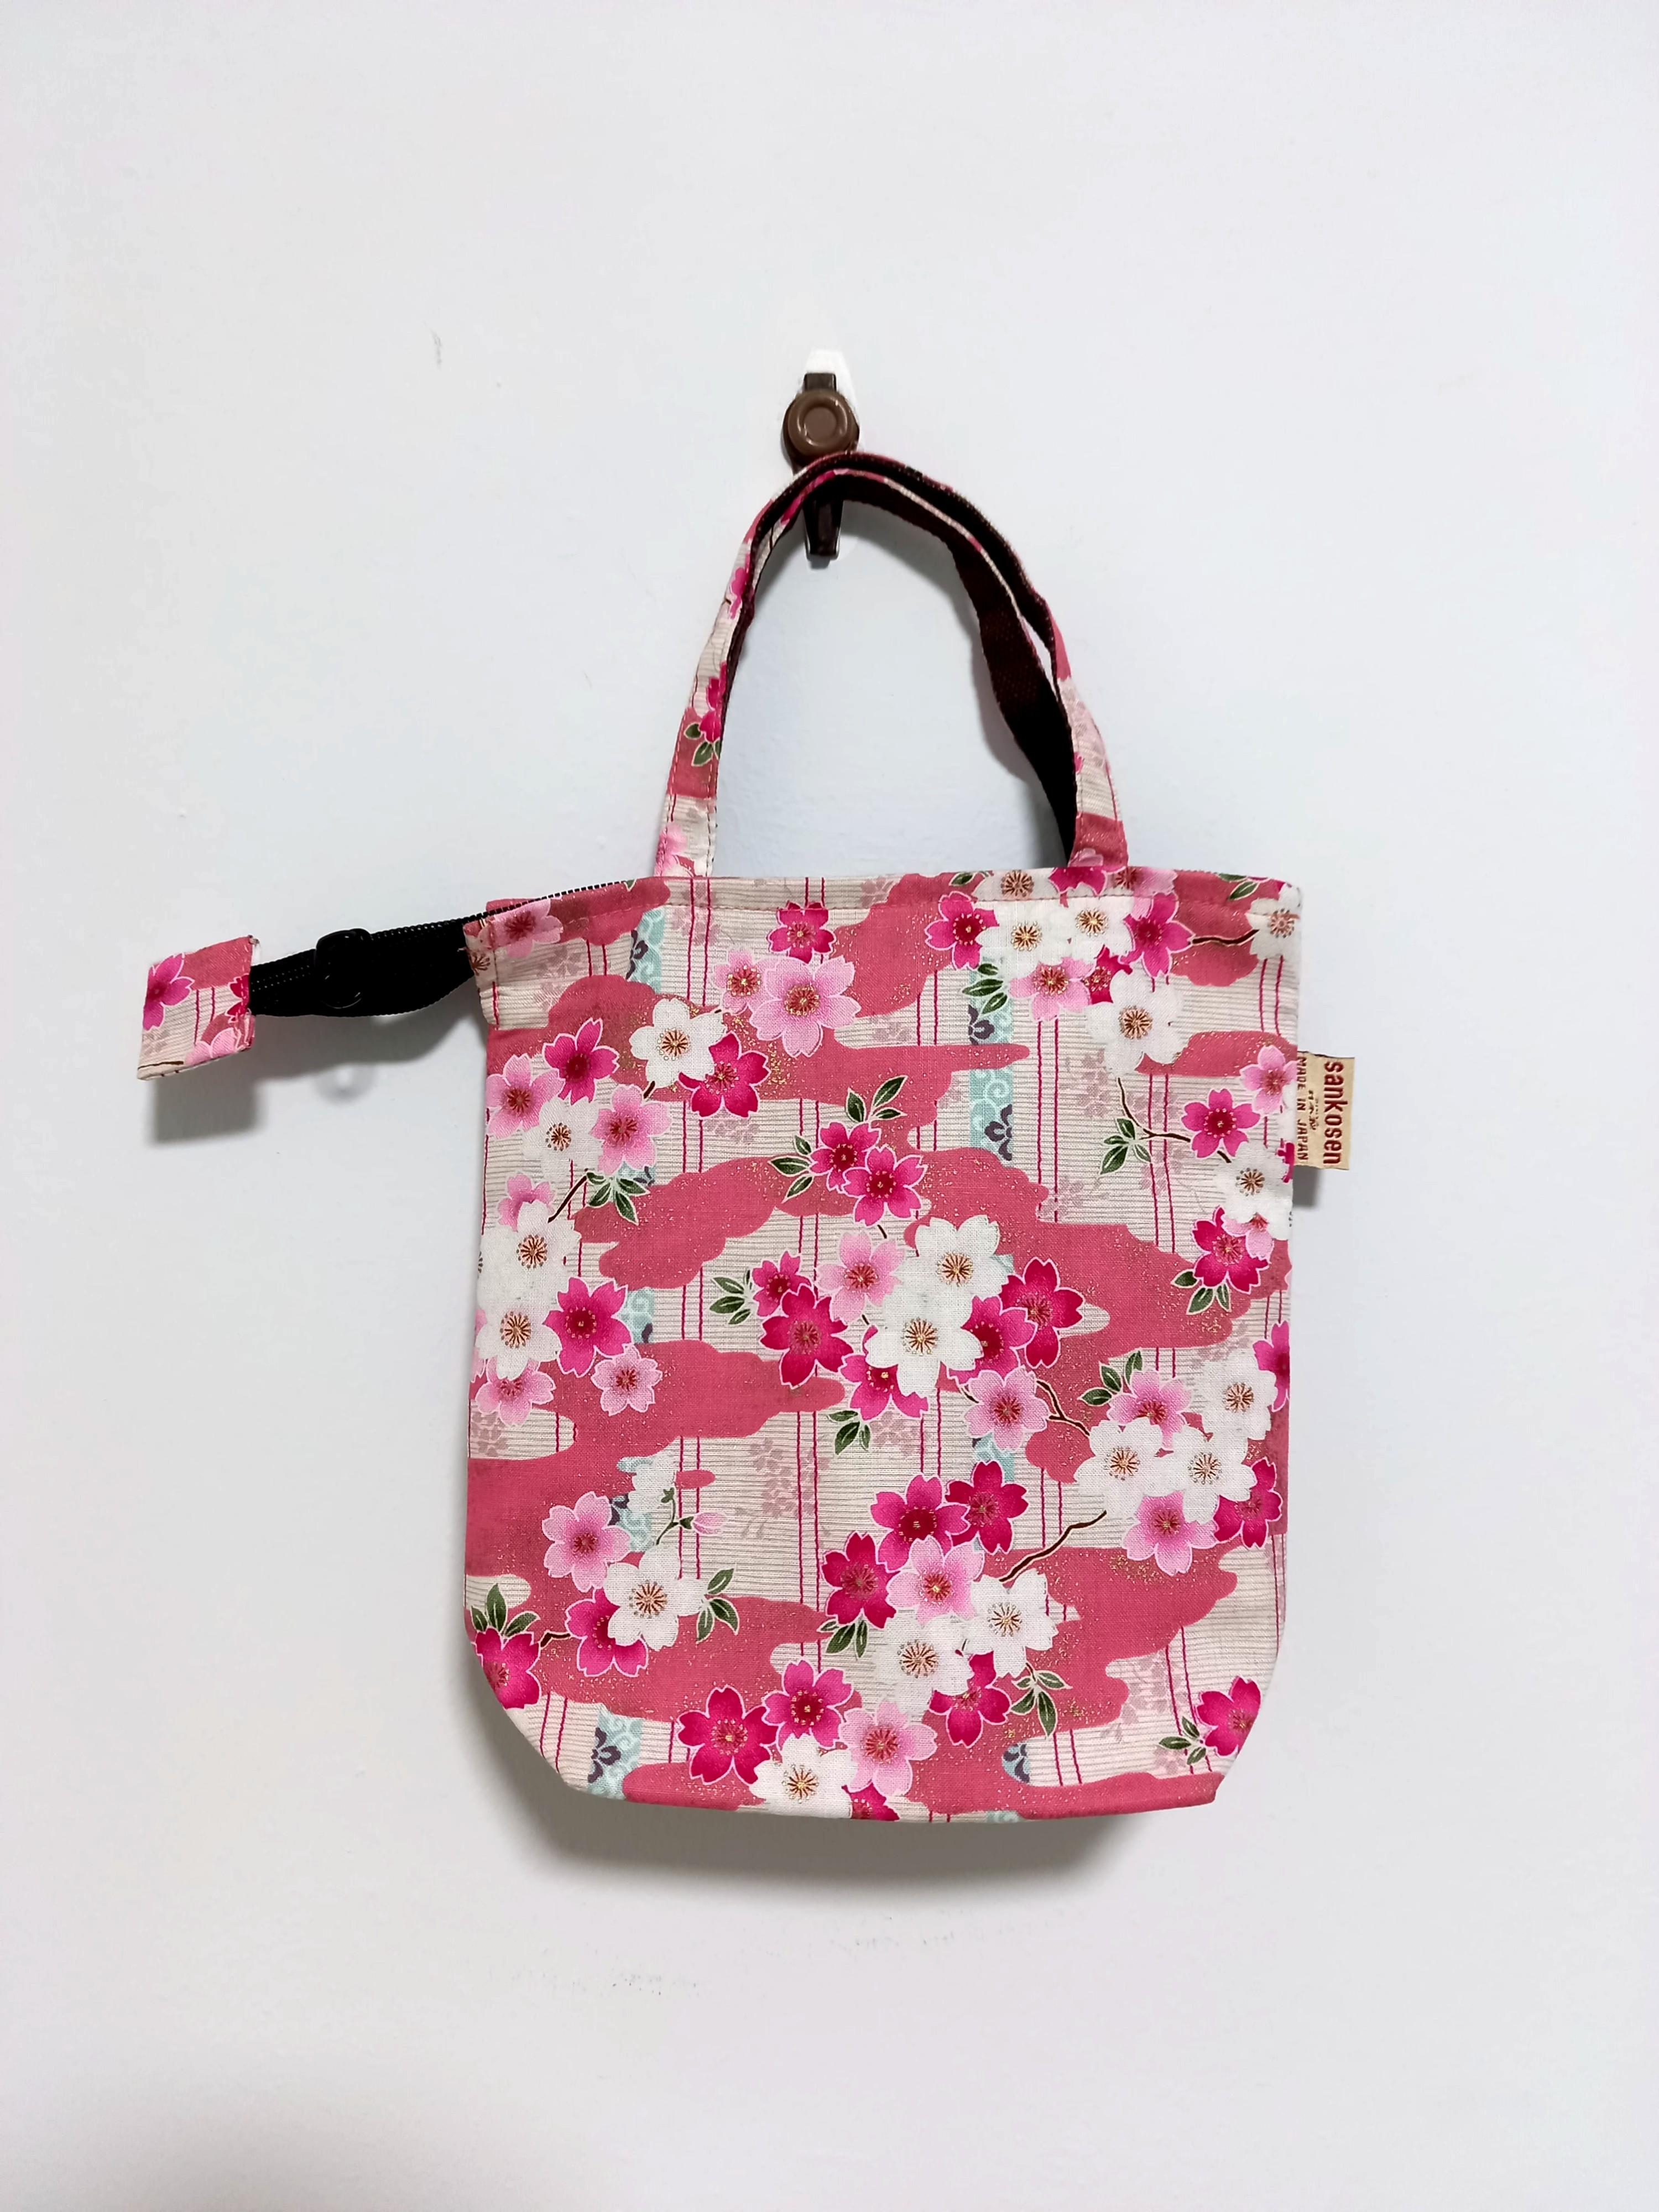 Floral Buckle Coin Purses (SAKURAKOUSHI Cherry Blossoms - Pink) / Made in  Japan Kiss-lock Change Purse Wallets pouch for women